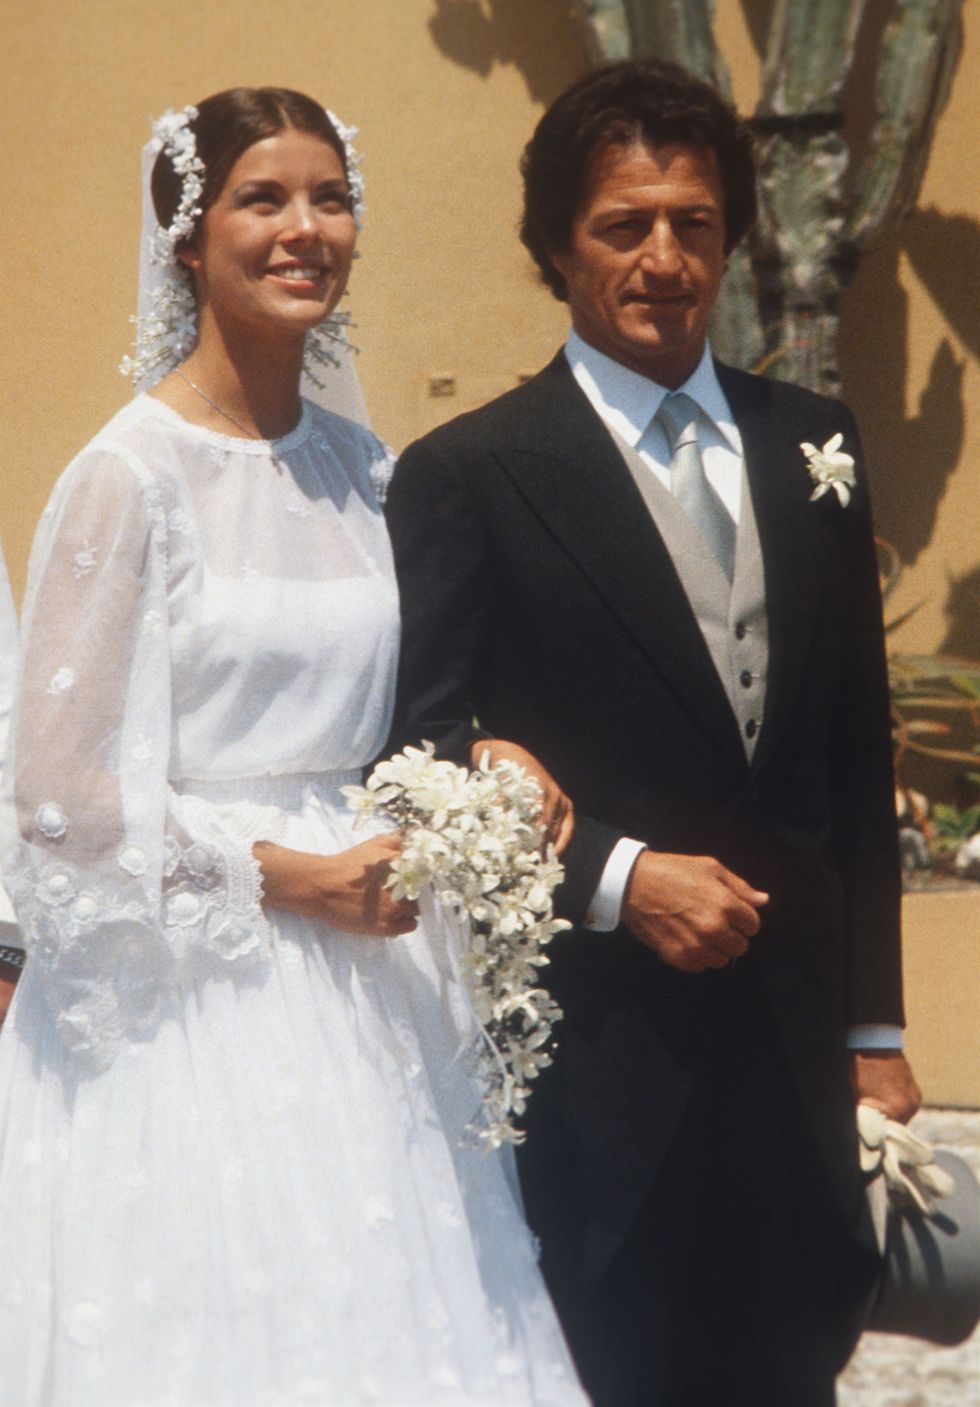 Princess Caroline marries Philippe Juno, her first husband before Stefano Casiraghi, Charlotte's father